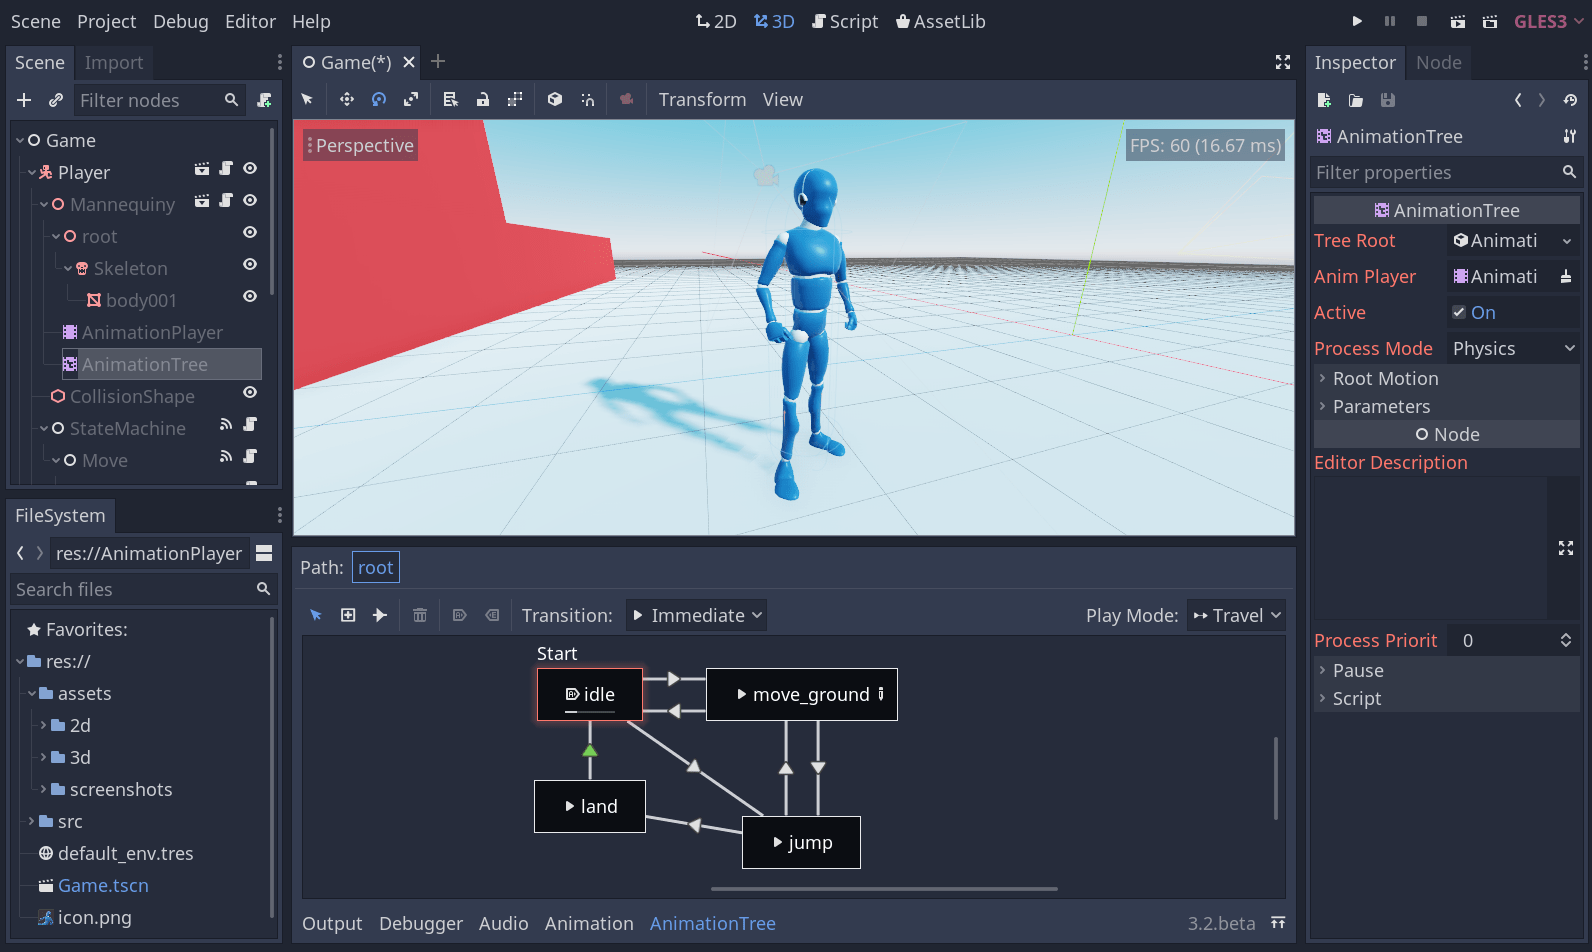 Screenshot of the Godot editor, showing the 3d view